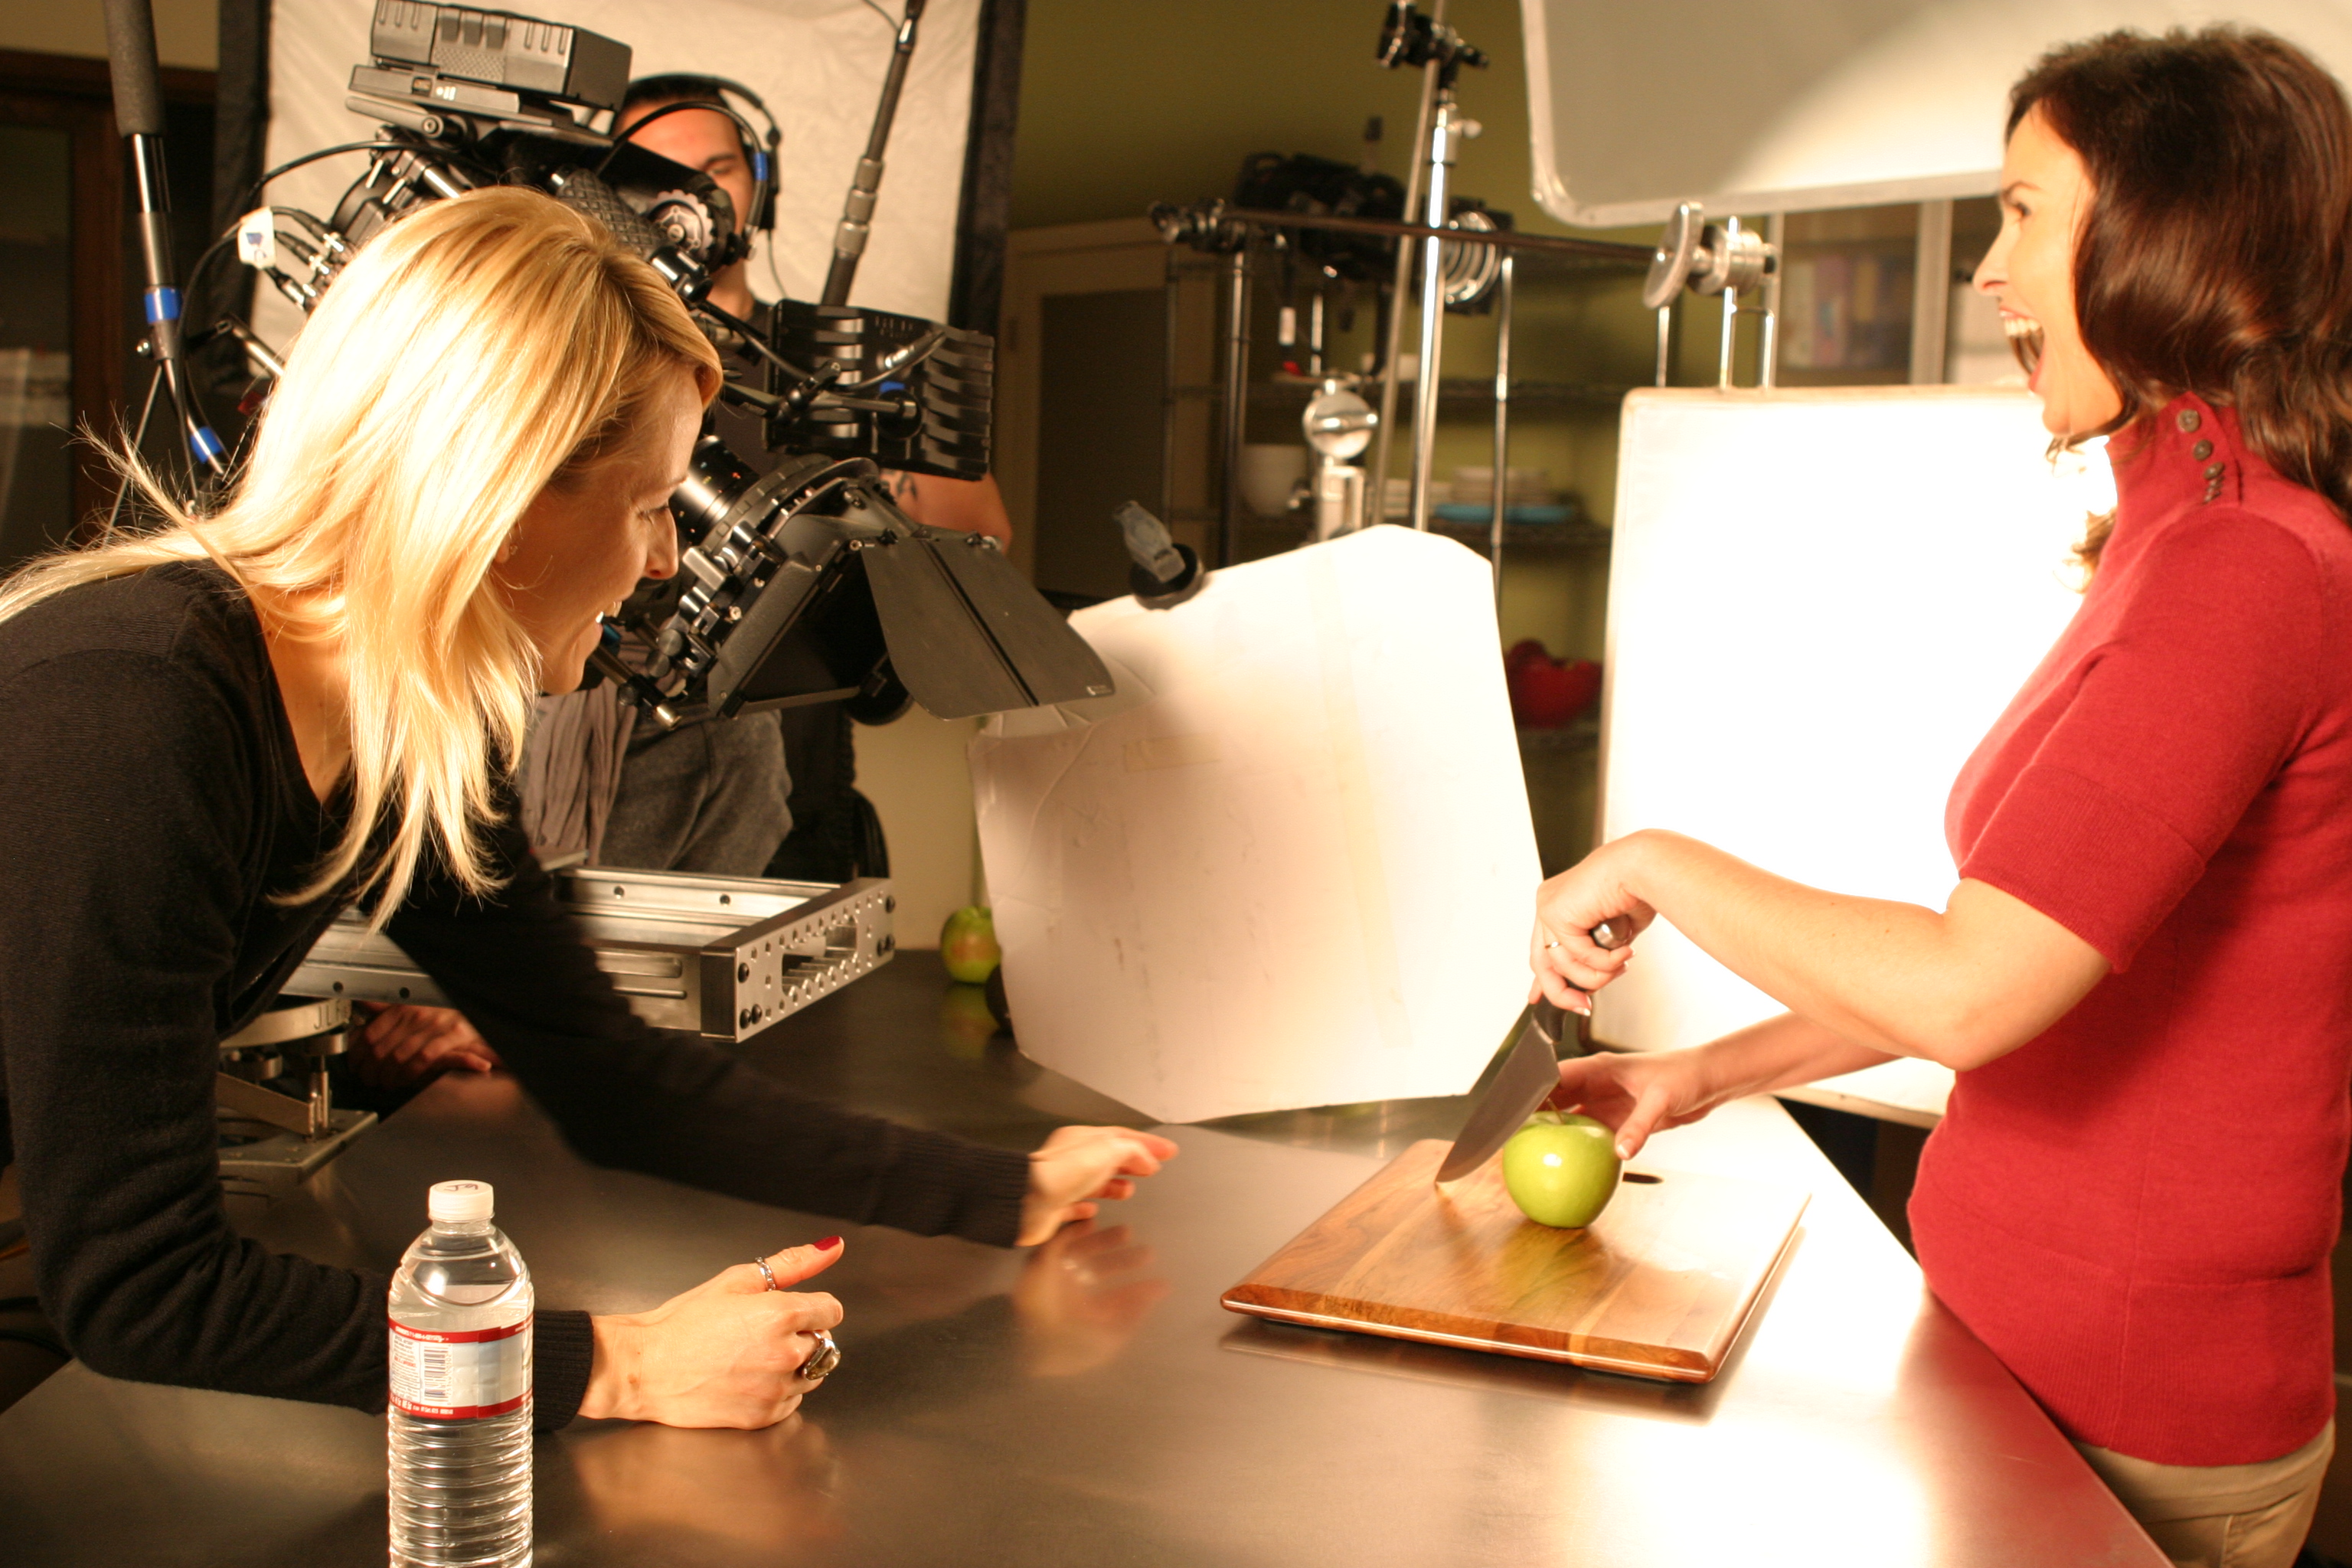 Director Jenine Mayring on the set of a national TV commercial shoot for Apple-A-Day Edible Strips, produced by Brooklyn Girl Productions.